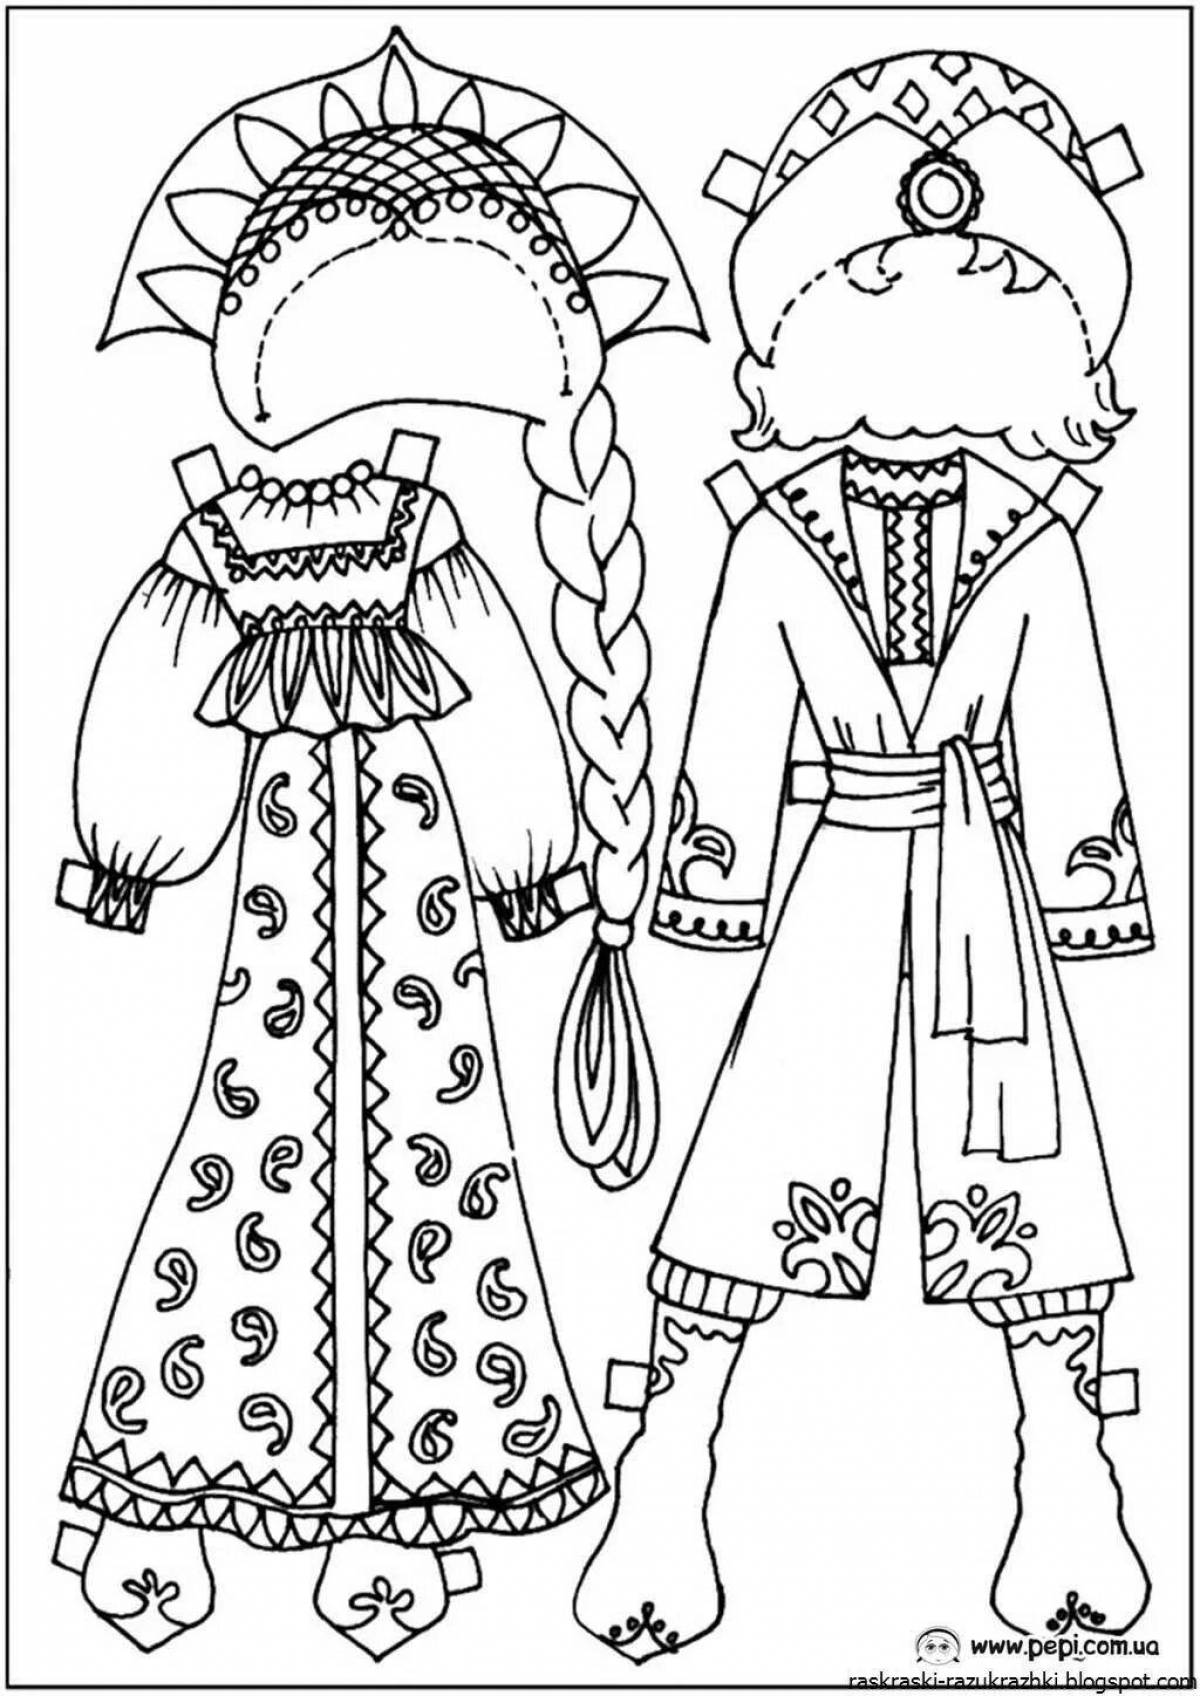 Playful Russian folk clothes coloring pages for children